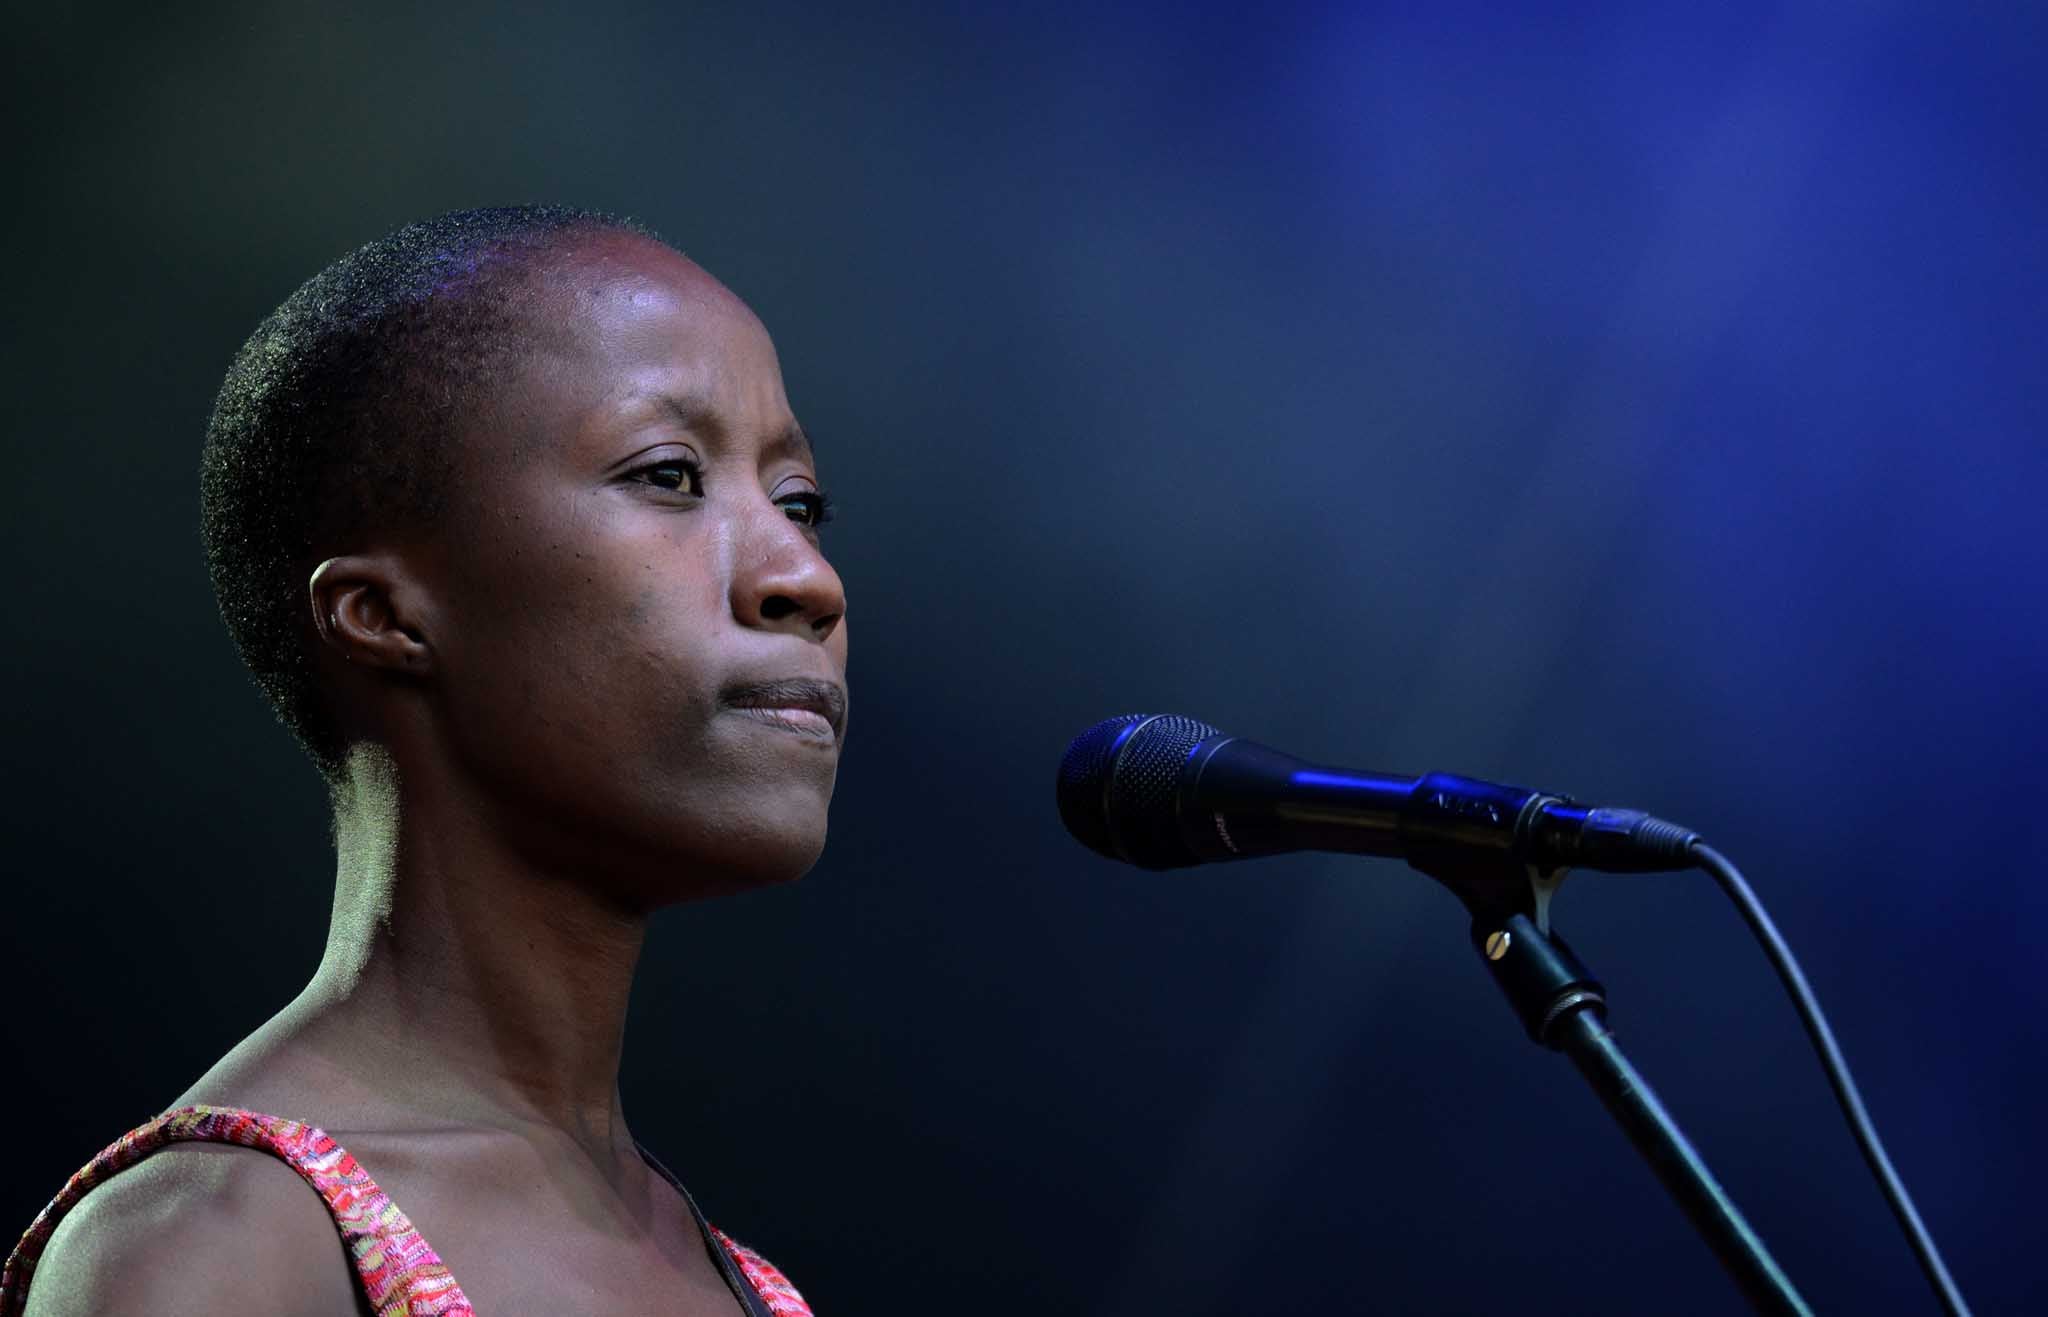 Malian singer/songwriter Rokia Traore who performed at Womad 2013